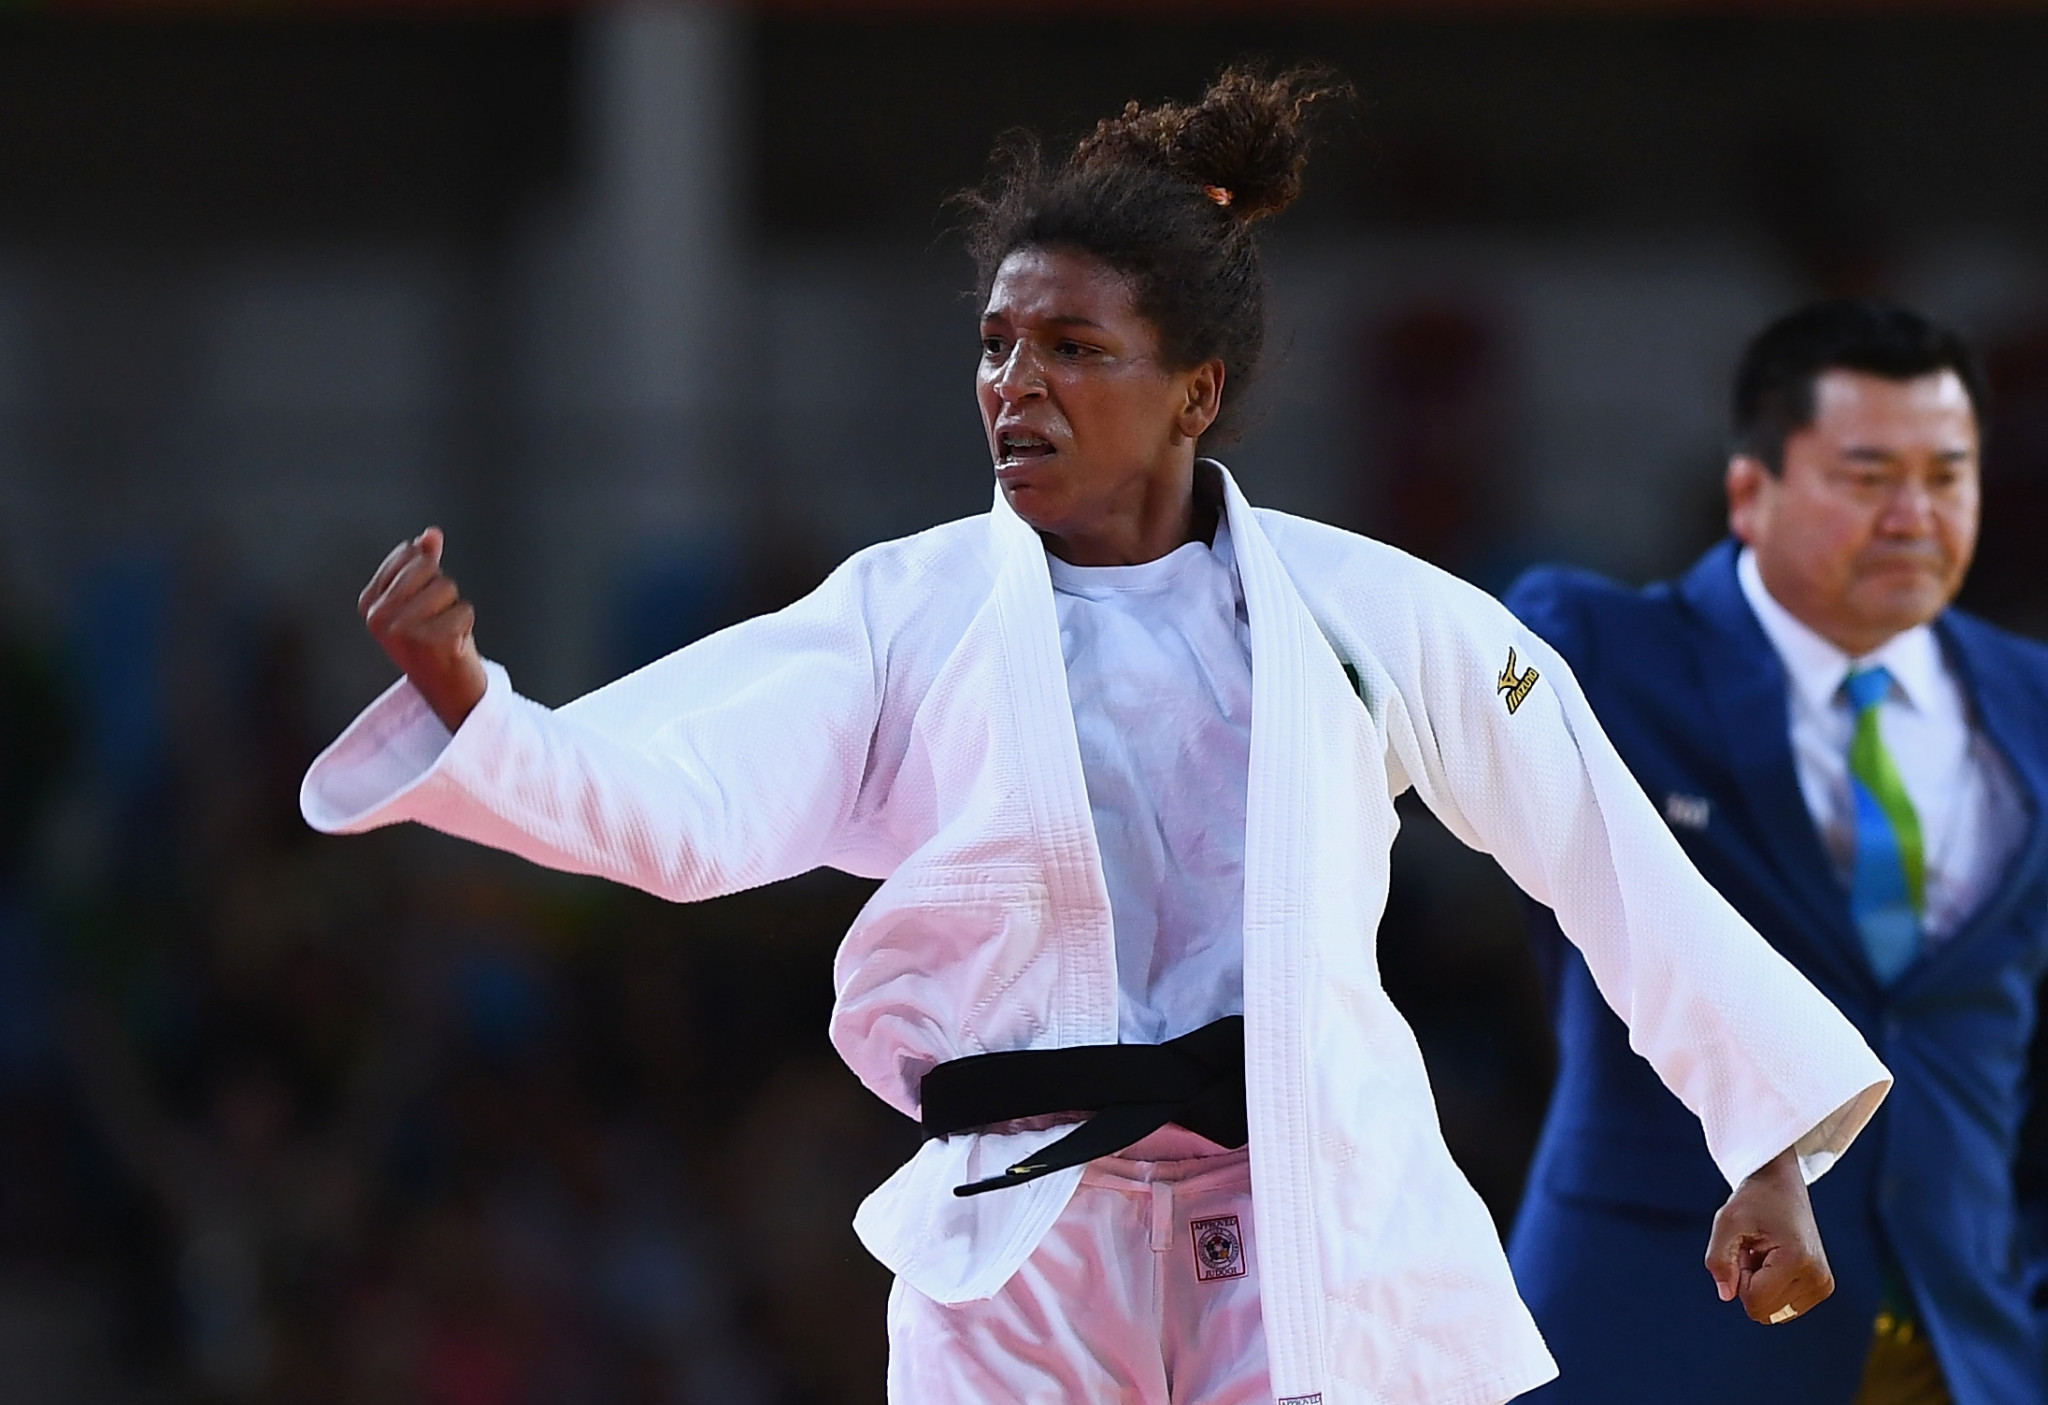 Rafaela Lopes Silva's appeal against her two-year ban from judo will be heard at the Court of Arbitration for Sport tomorrow ©Getty Images